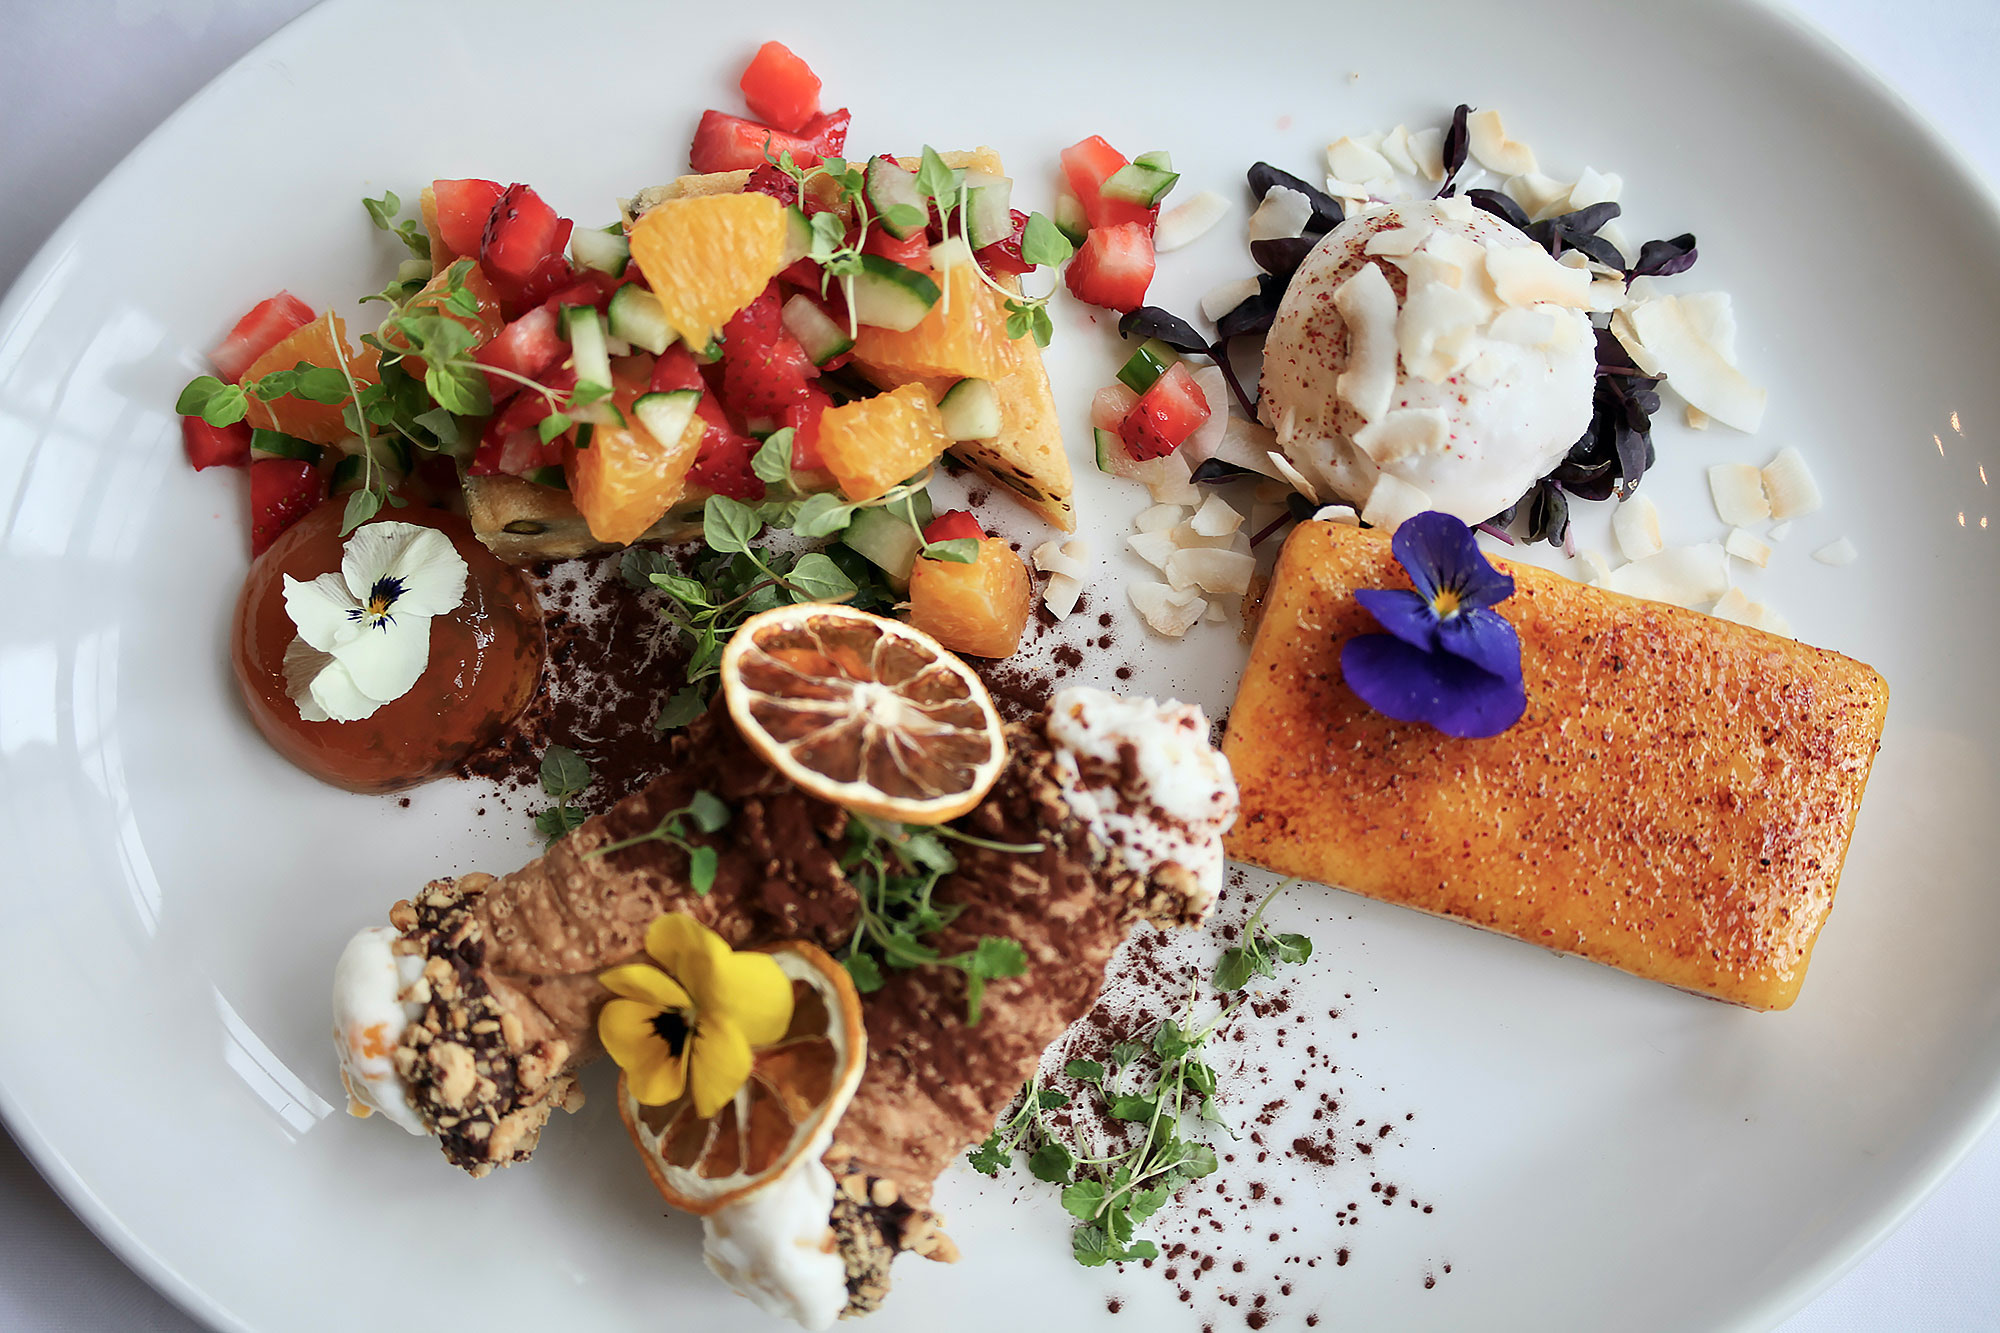 To finish: A sharing platter of course! 1. Sicilian cannoli, ricotta, gianduja, candied lemon 2. White chocolate and pistachio brownie, Pimm’s jelly strawberries, cucumber, orange, mint 3. Caramelized passion fruit tart, coconut sorbet, pink peppercorn, basil.